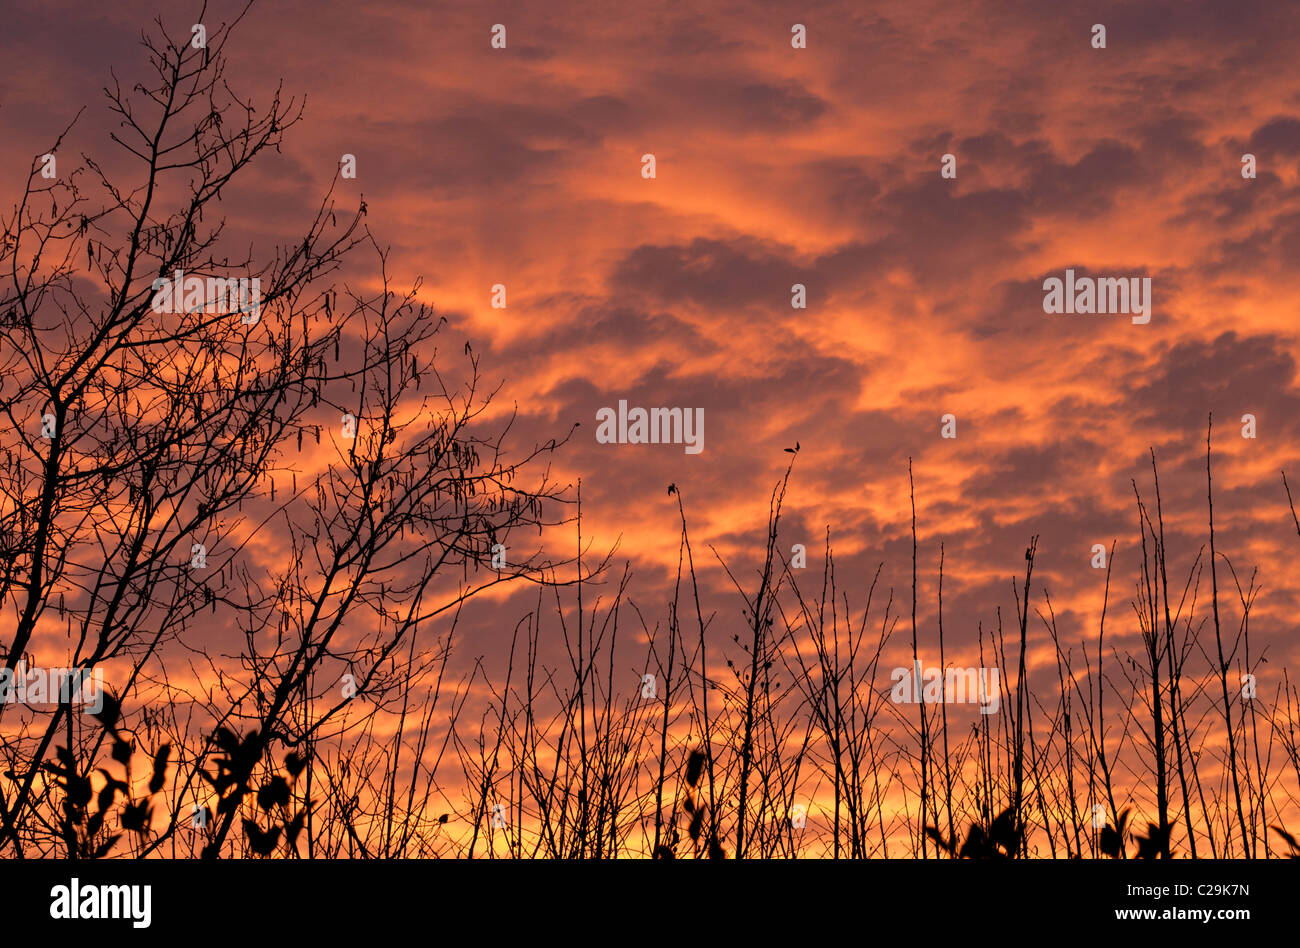 Dramatic orange clouds lit by setting sun with silhouetted tree branches in foreground, Devon UK Stock Photo